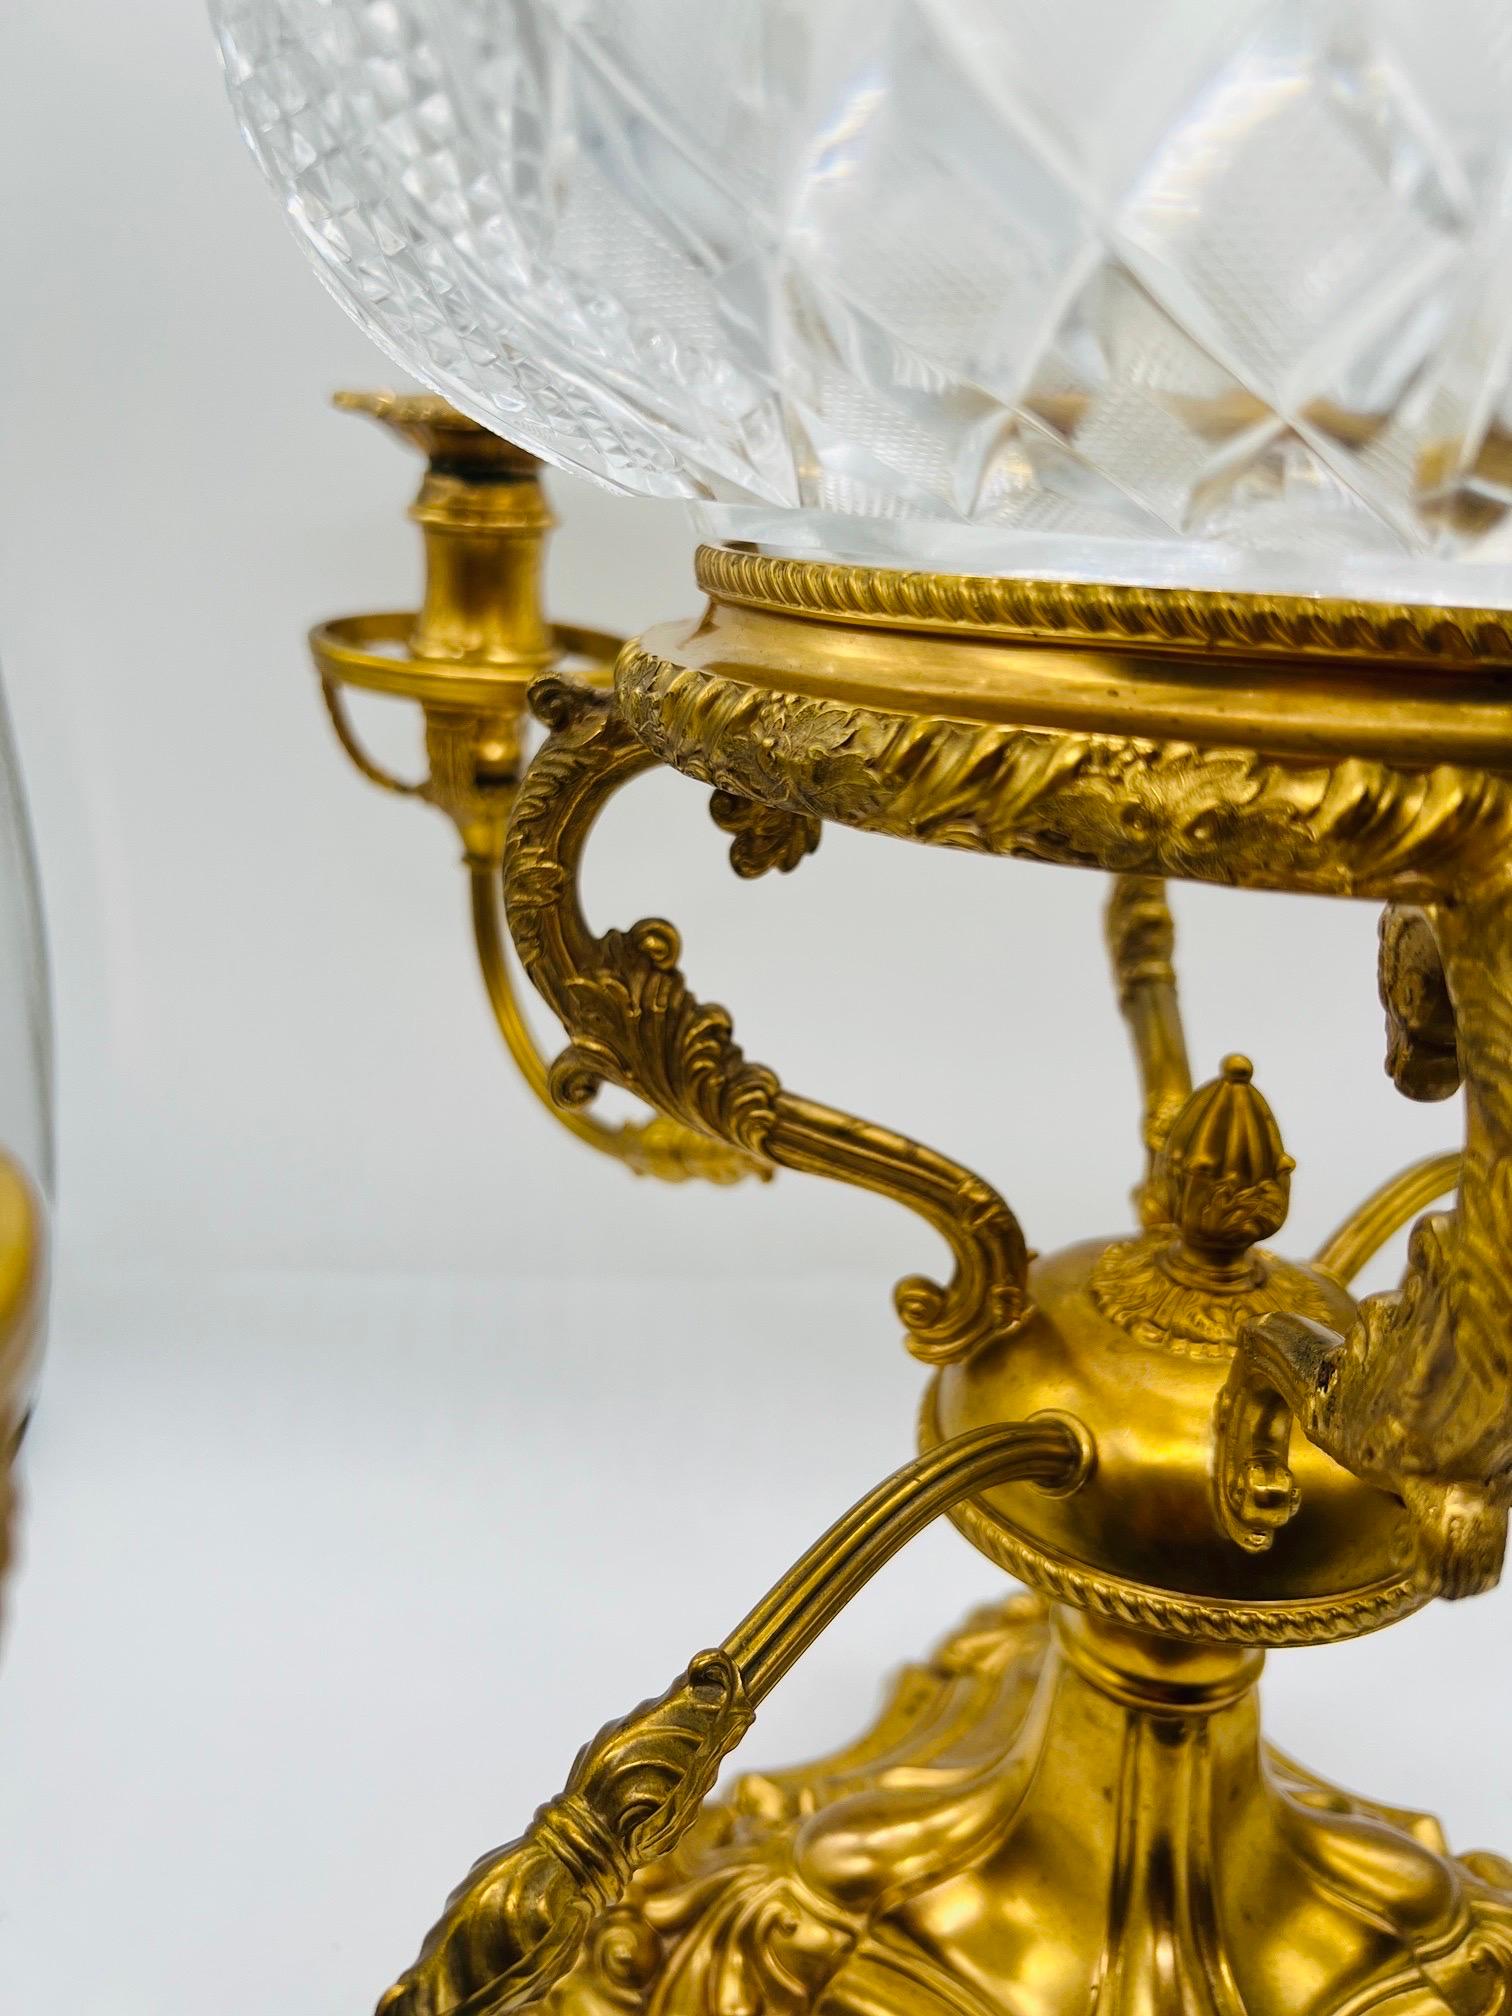 English Sheffield Gilt Plated William IV Style Cut Glass Epergne or Centerpiece For Sale 1